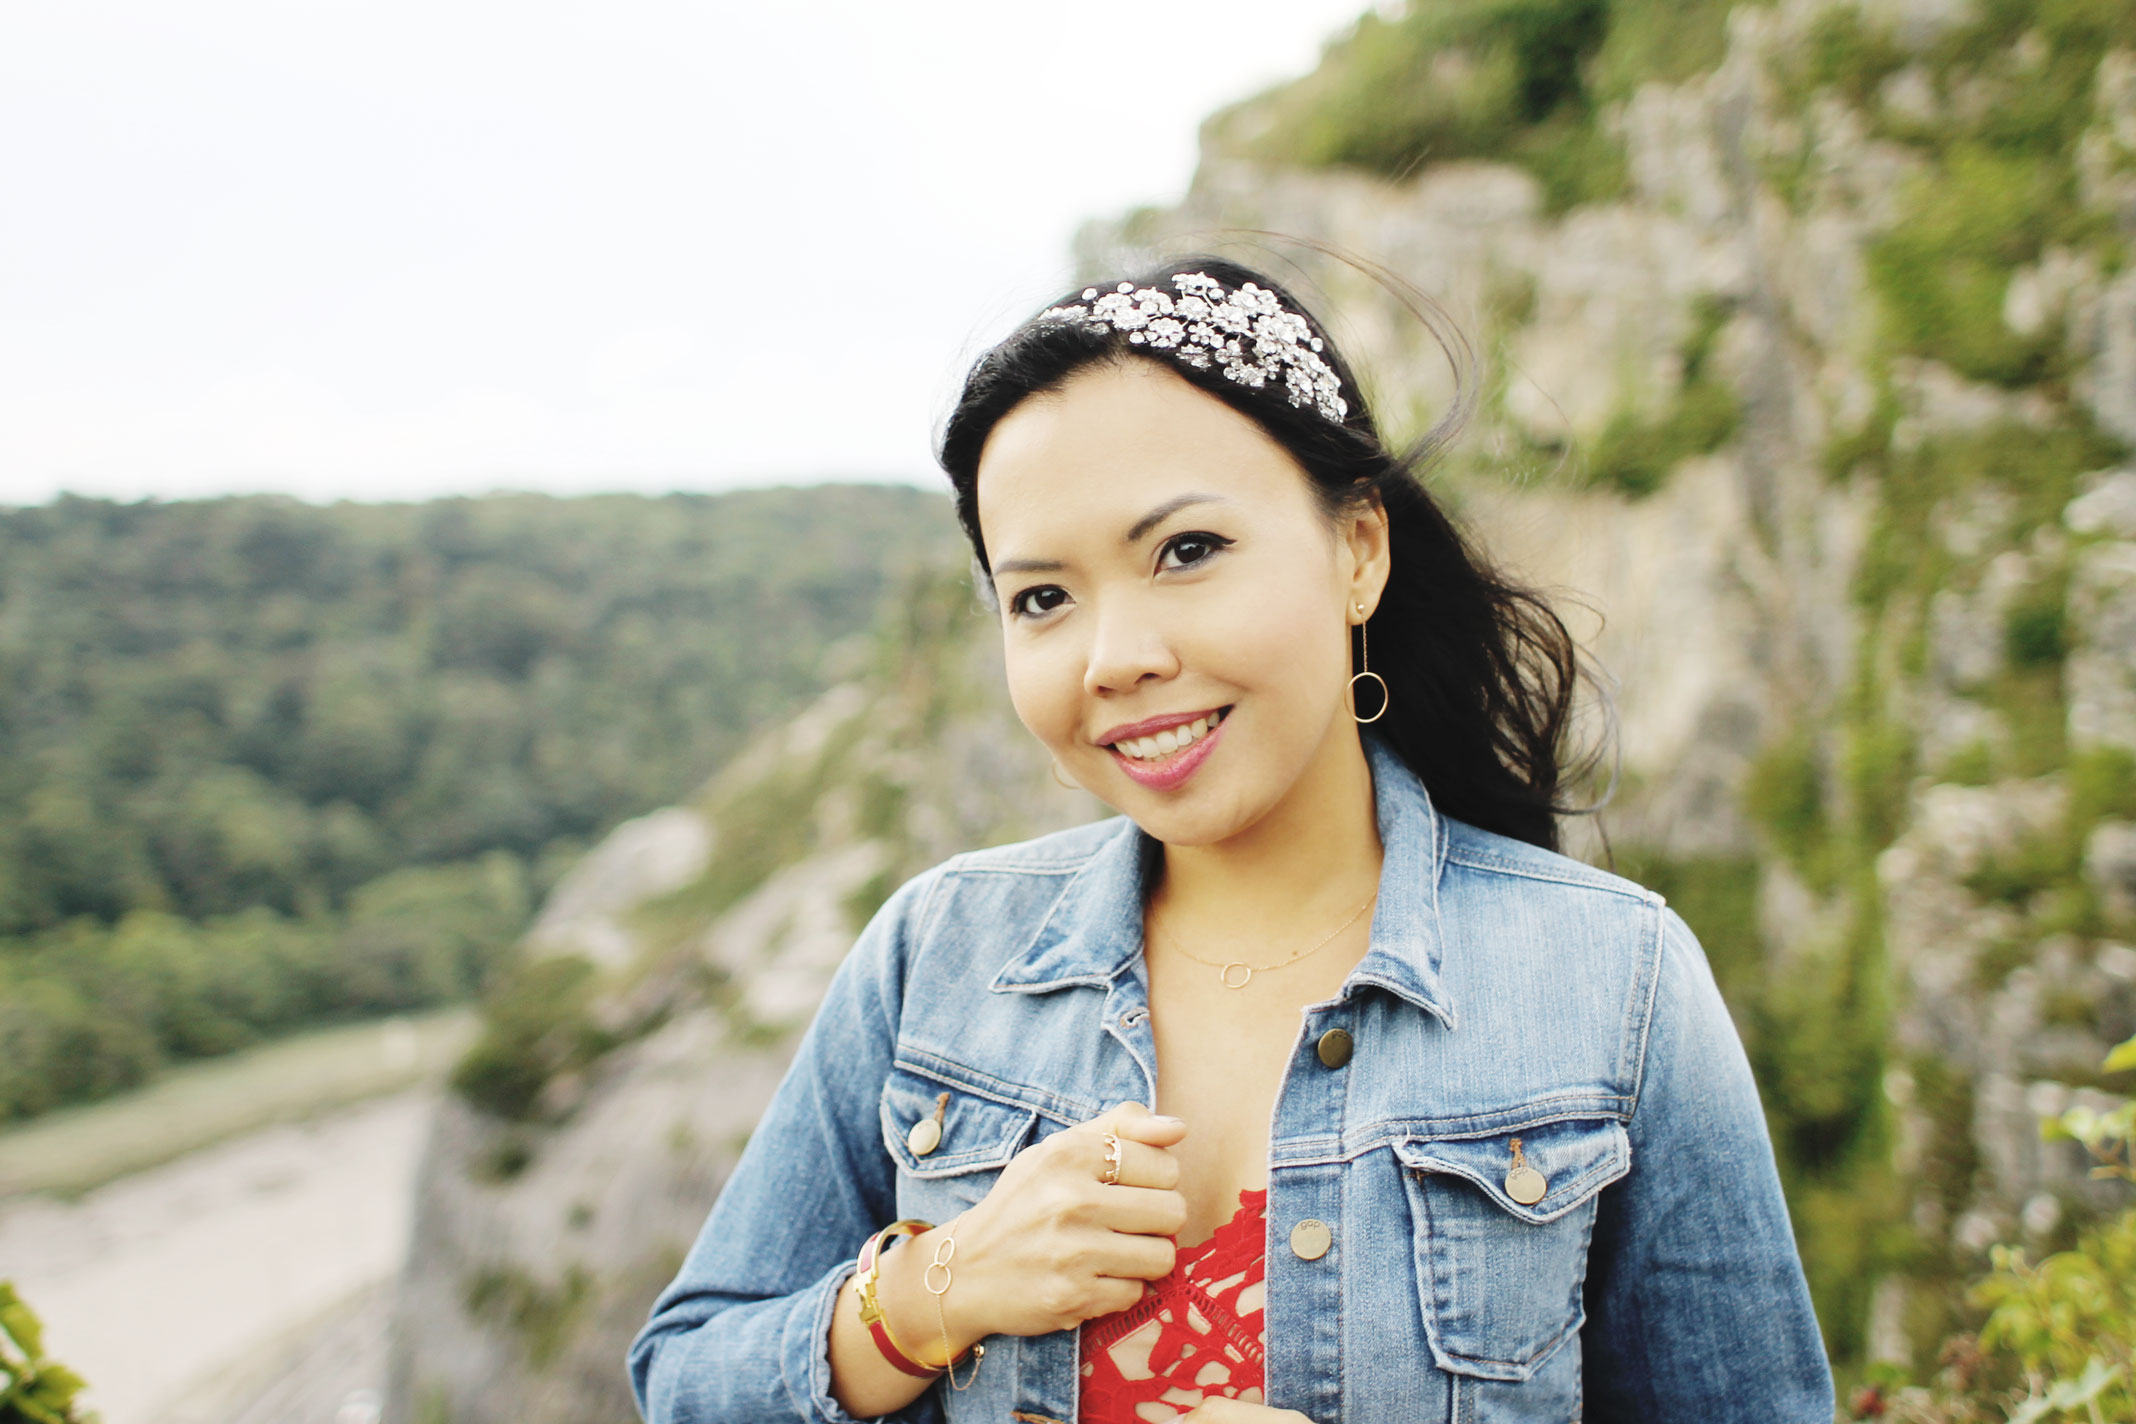 Styleat30 - Fashion + Travel UK - Bristol - Clifton Suspension Bridge - Women - Rose Gold Jewelry - Lilies and Crown Jewellery 03